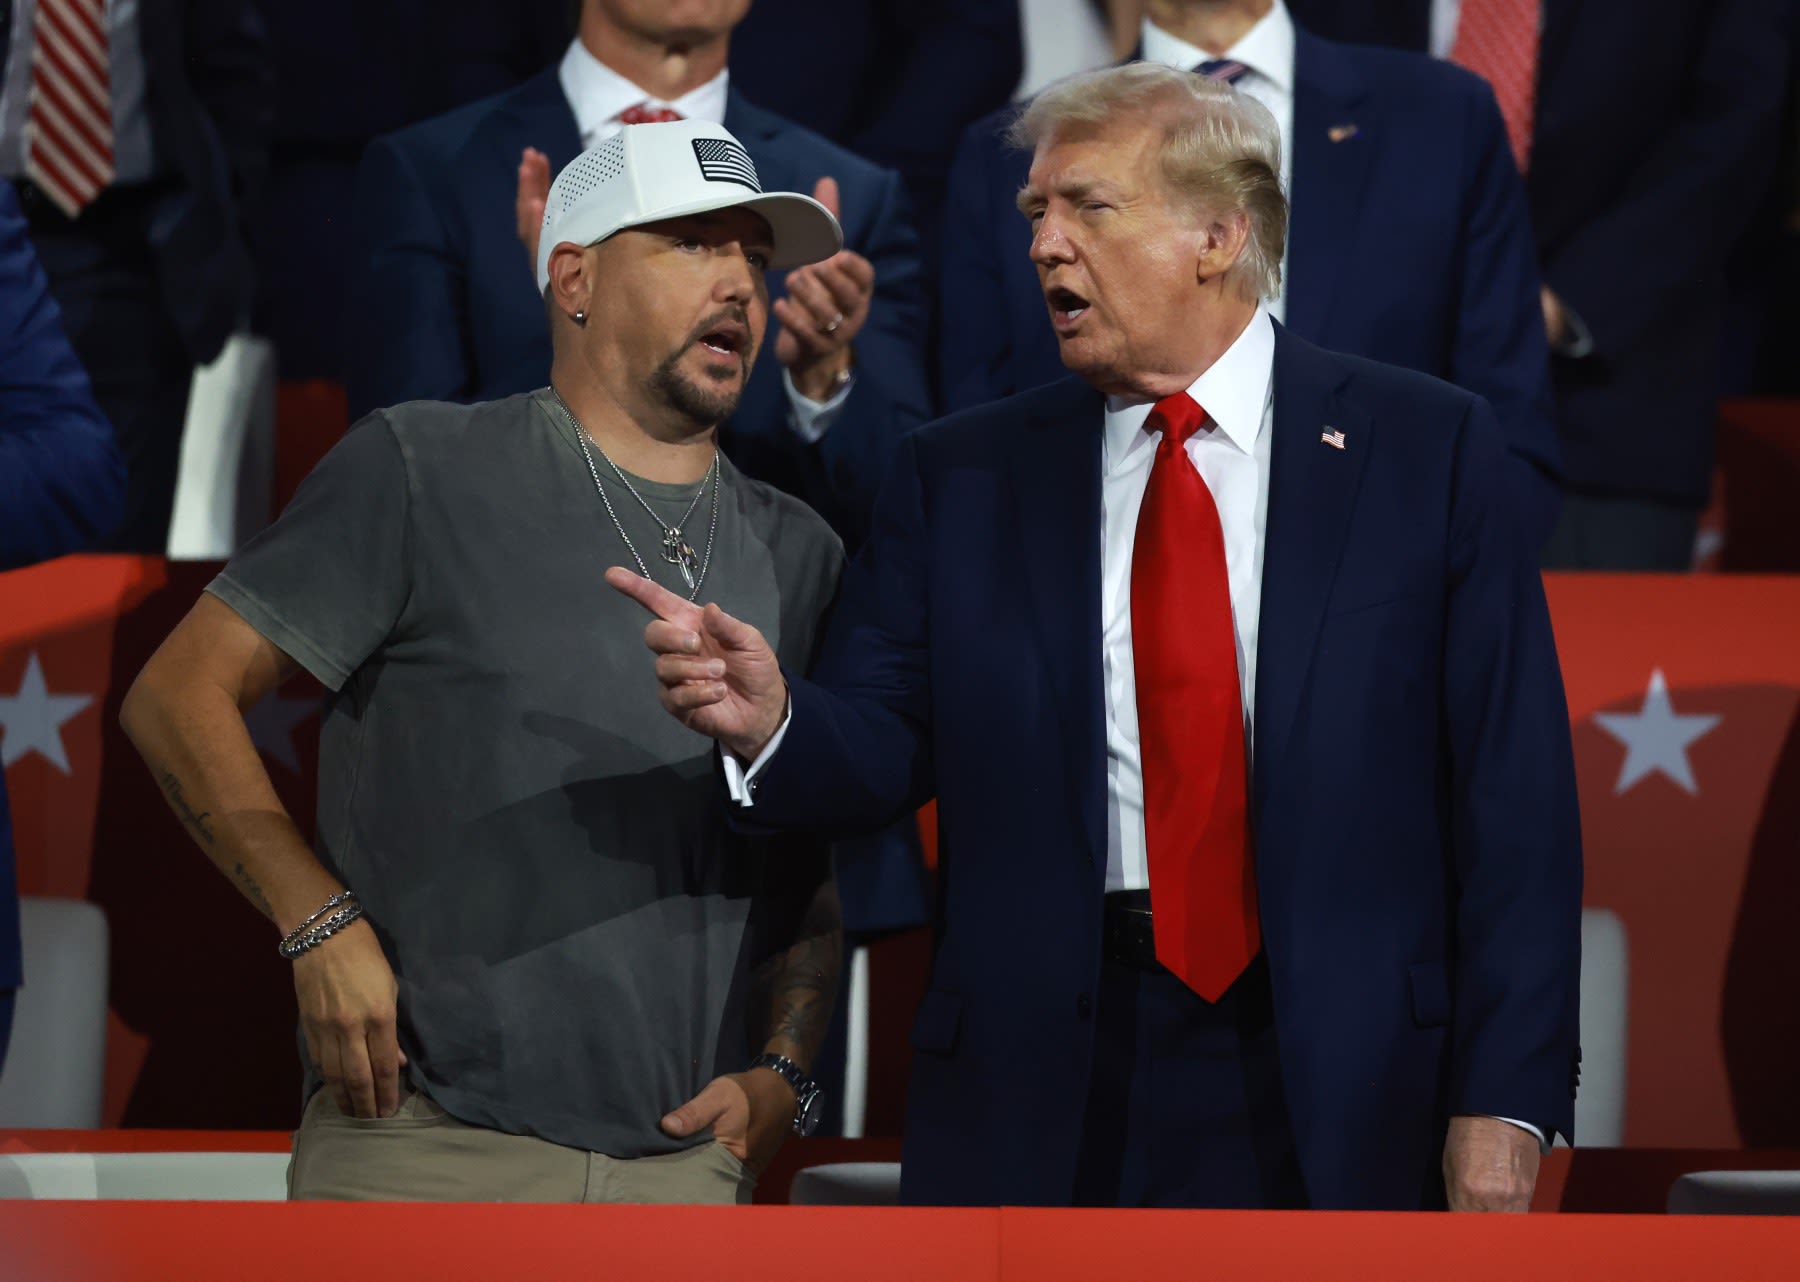 Jason Aldean, Golfing Buddy of Trump, Joins Former President at the RNC